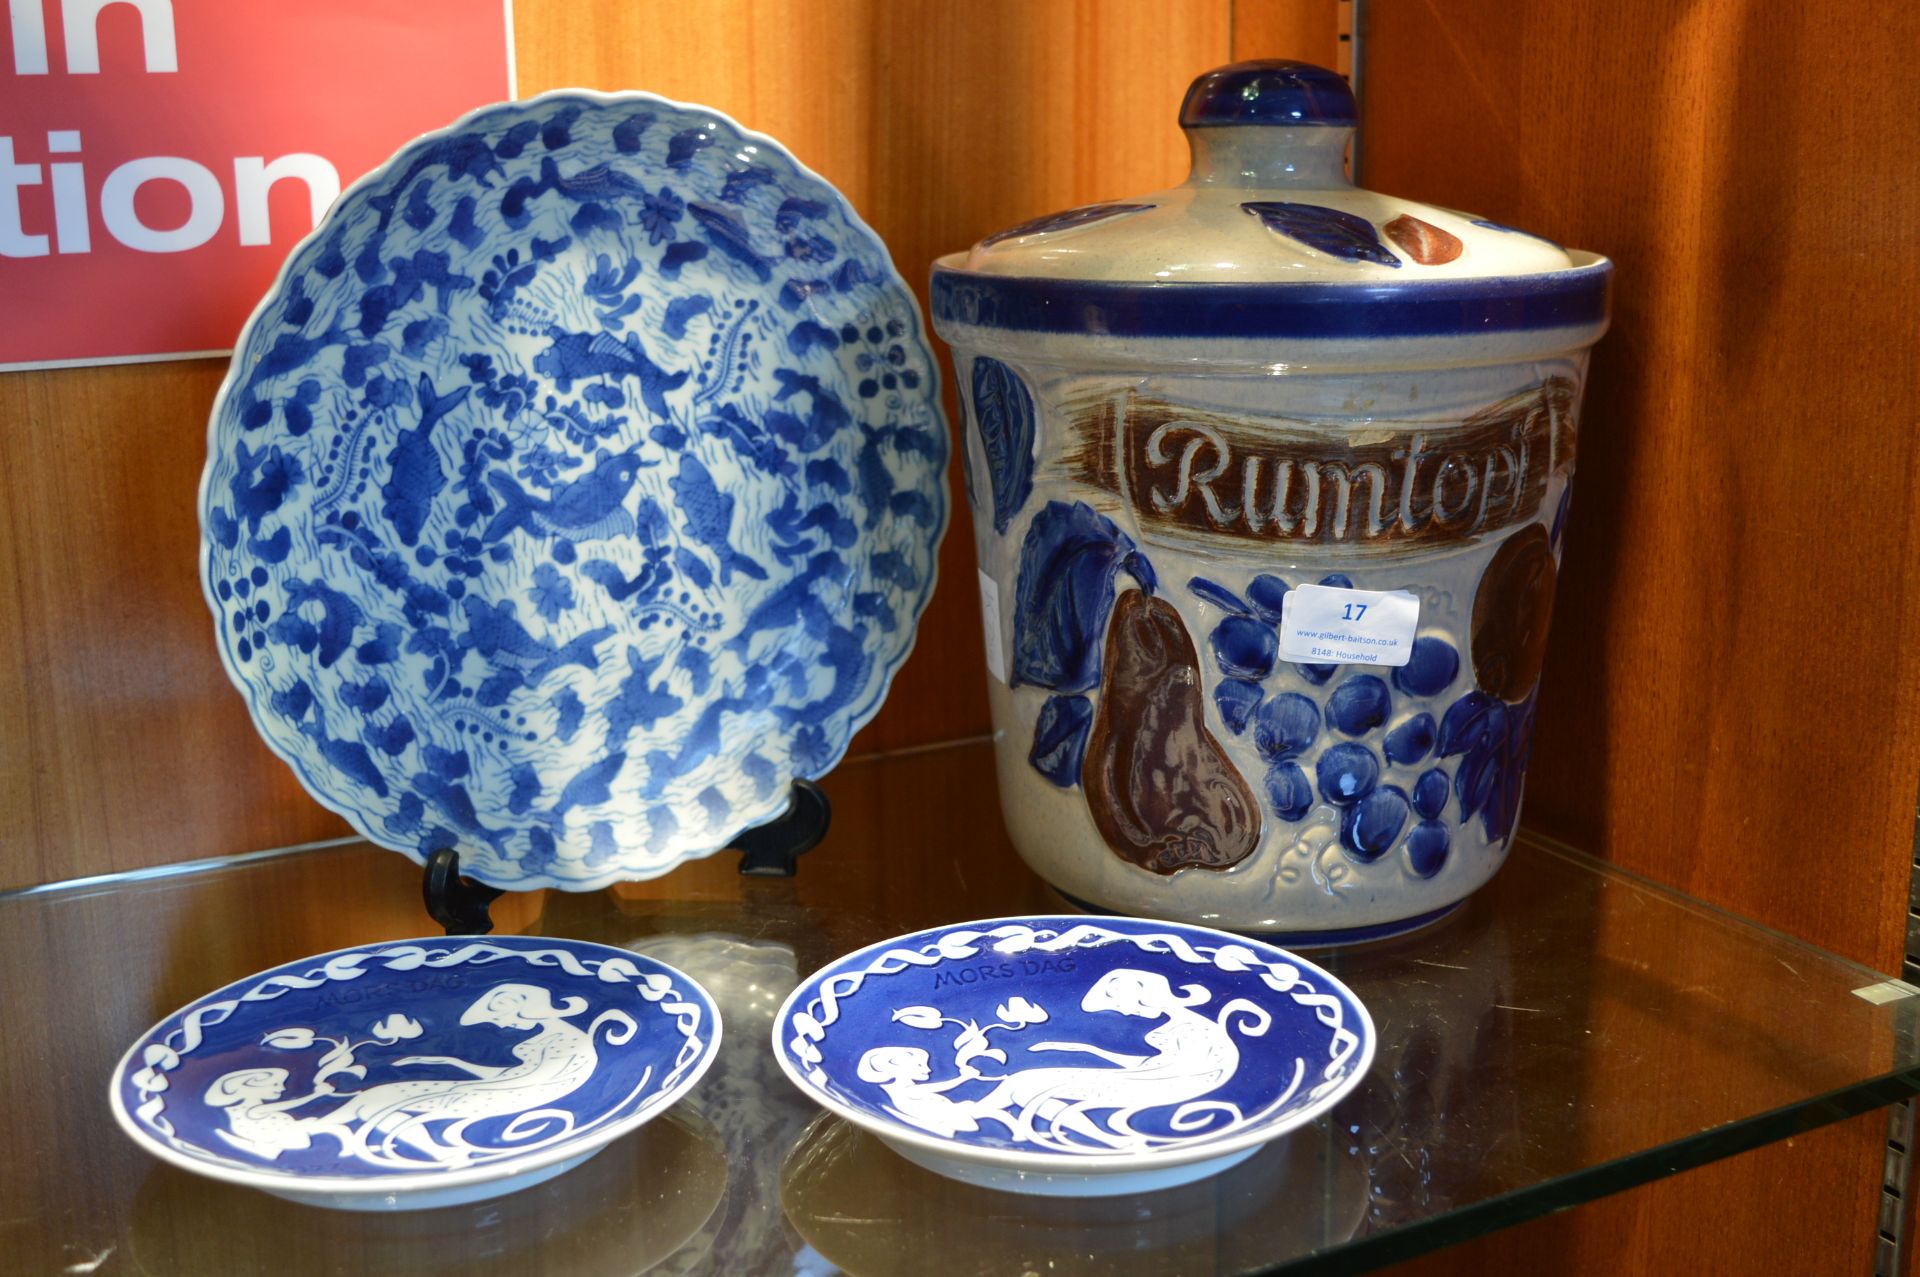 Rumtopf, Antique Blue & White Dishes, and a Chines